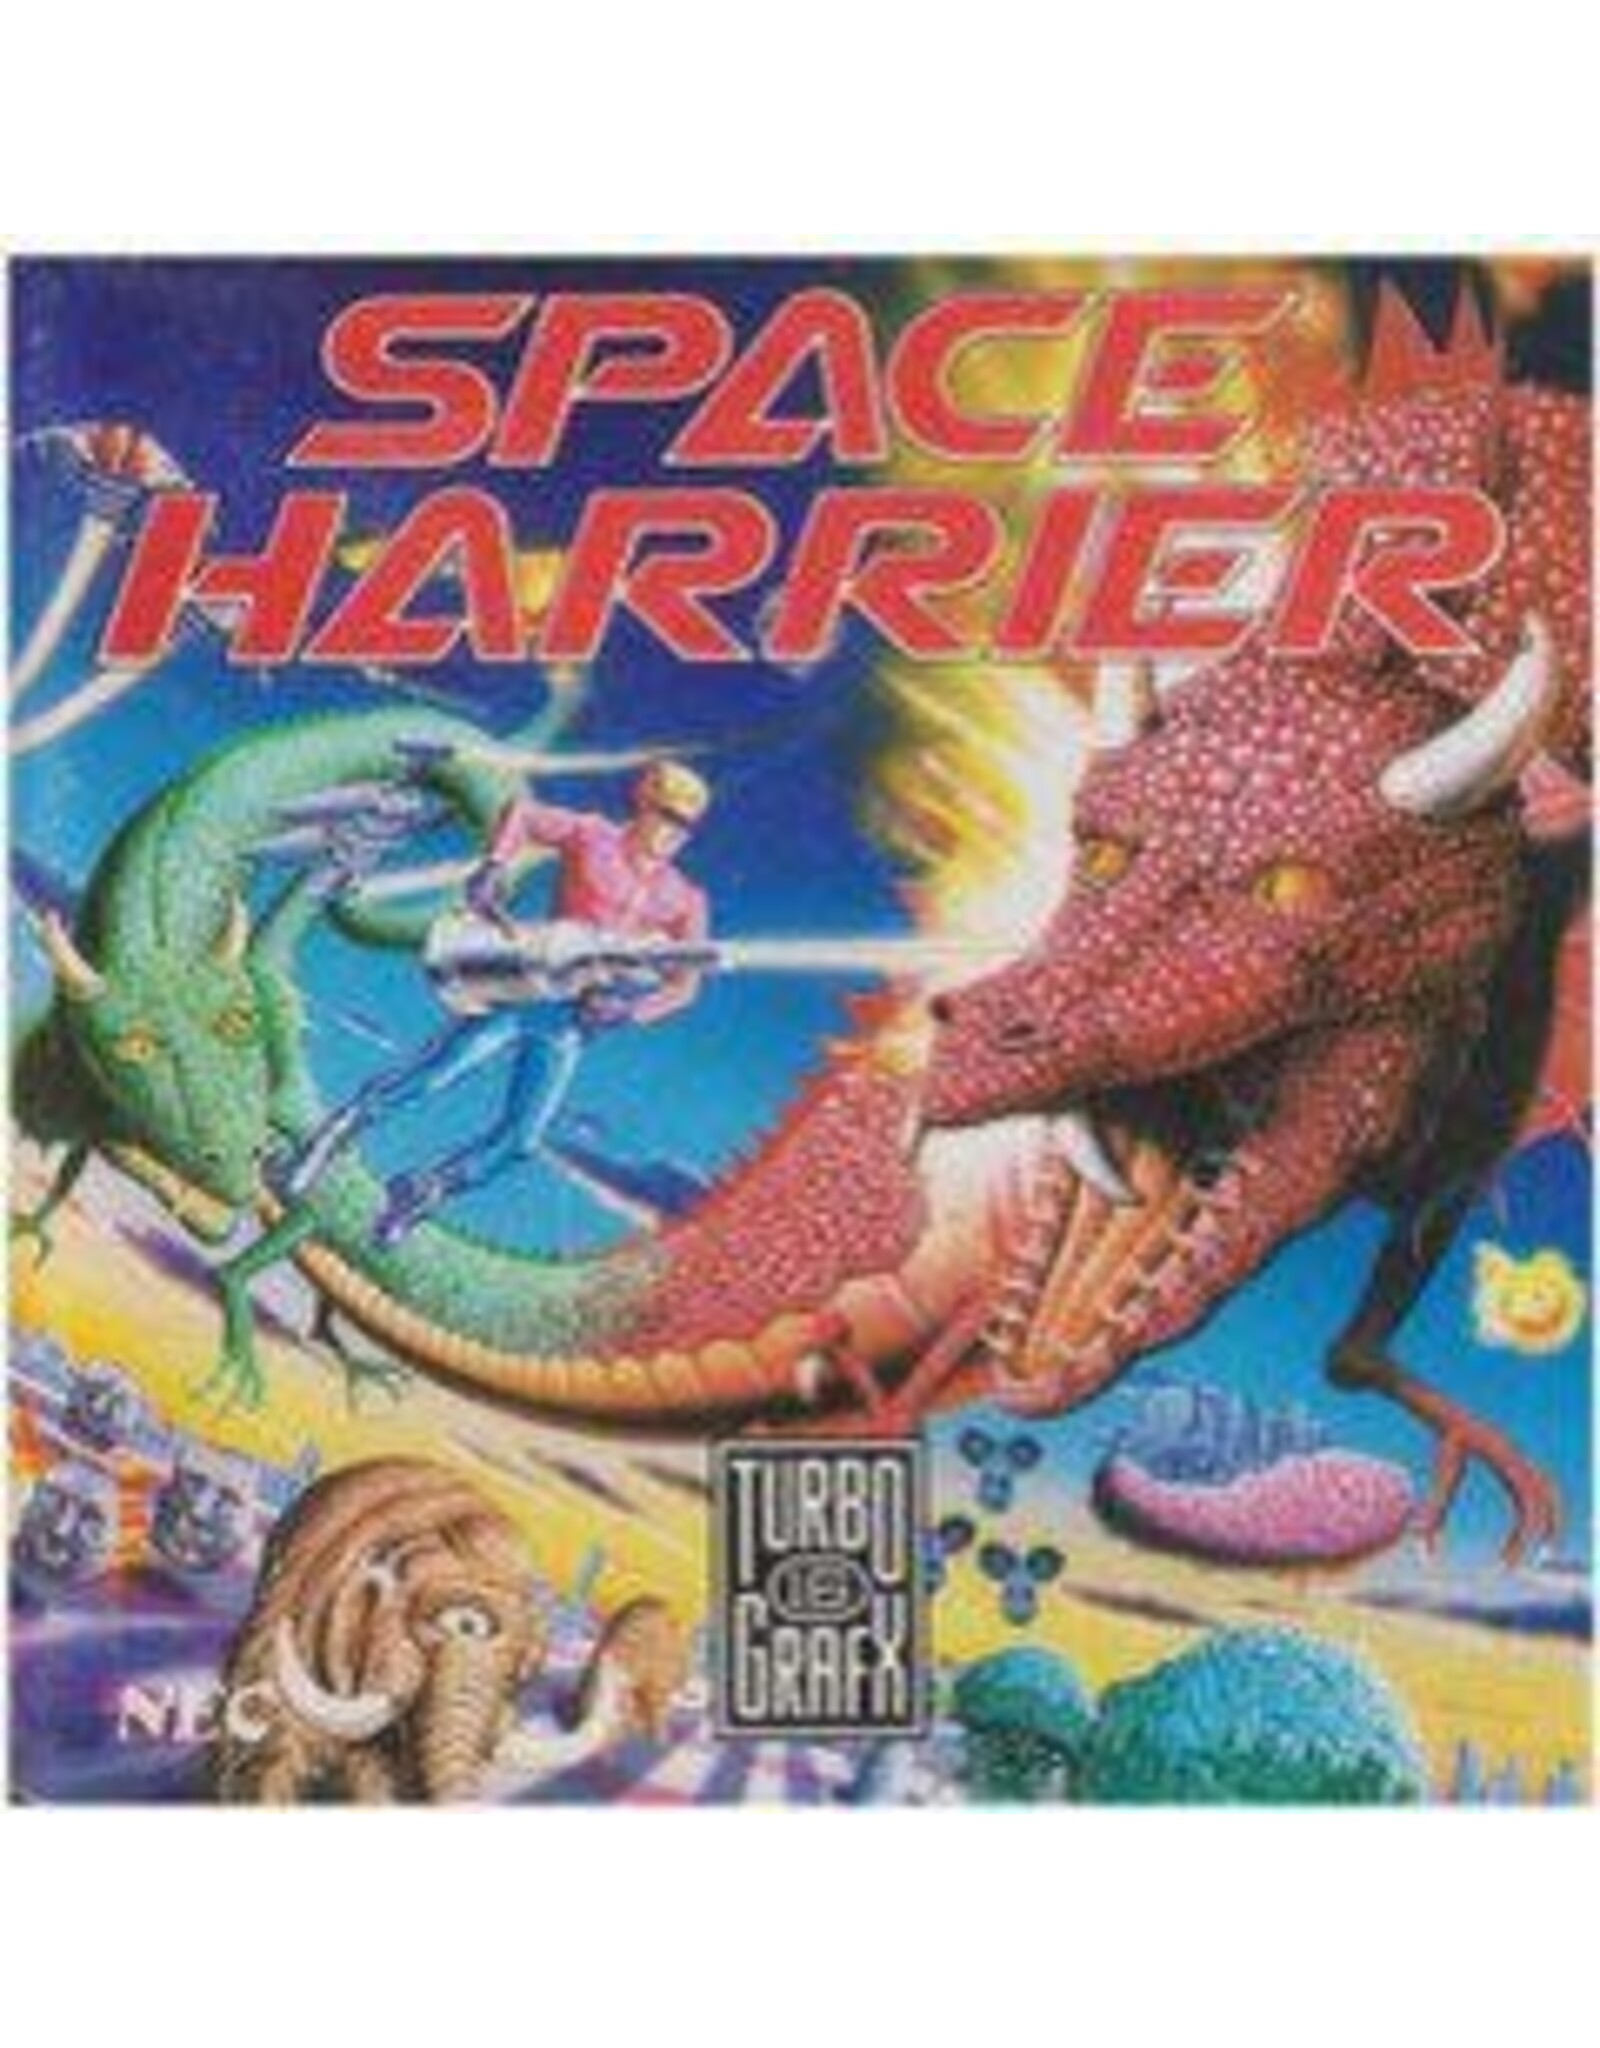 Turbografx 16 Space Harrier (Used, Cart Only)